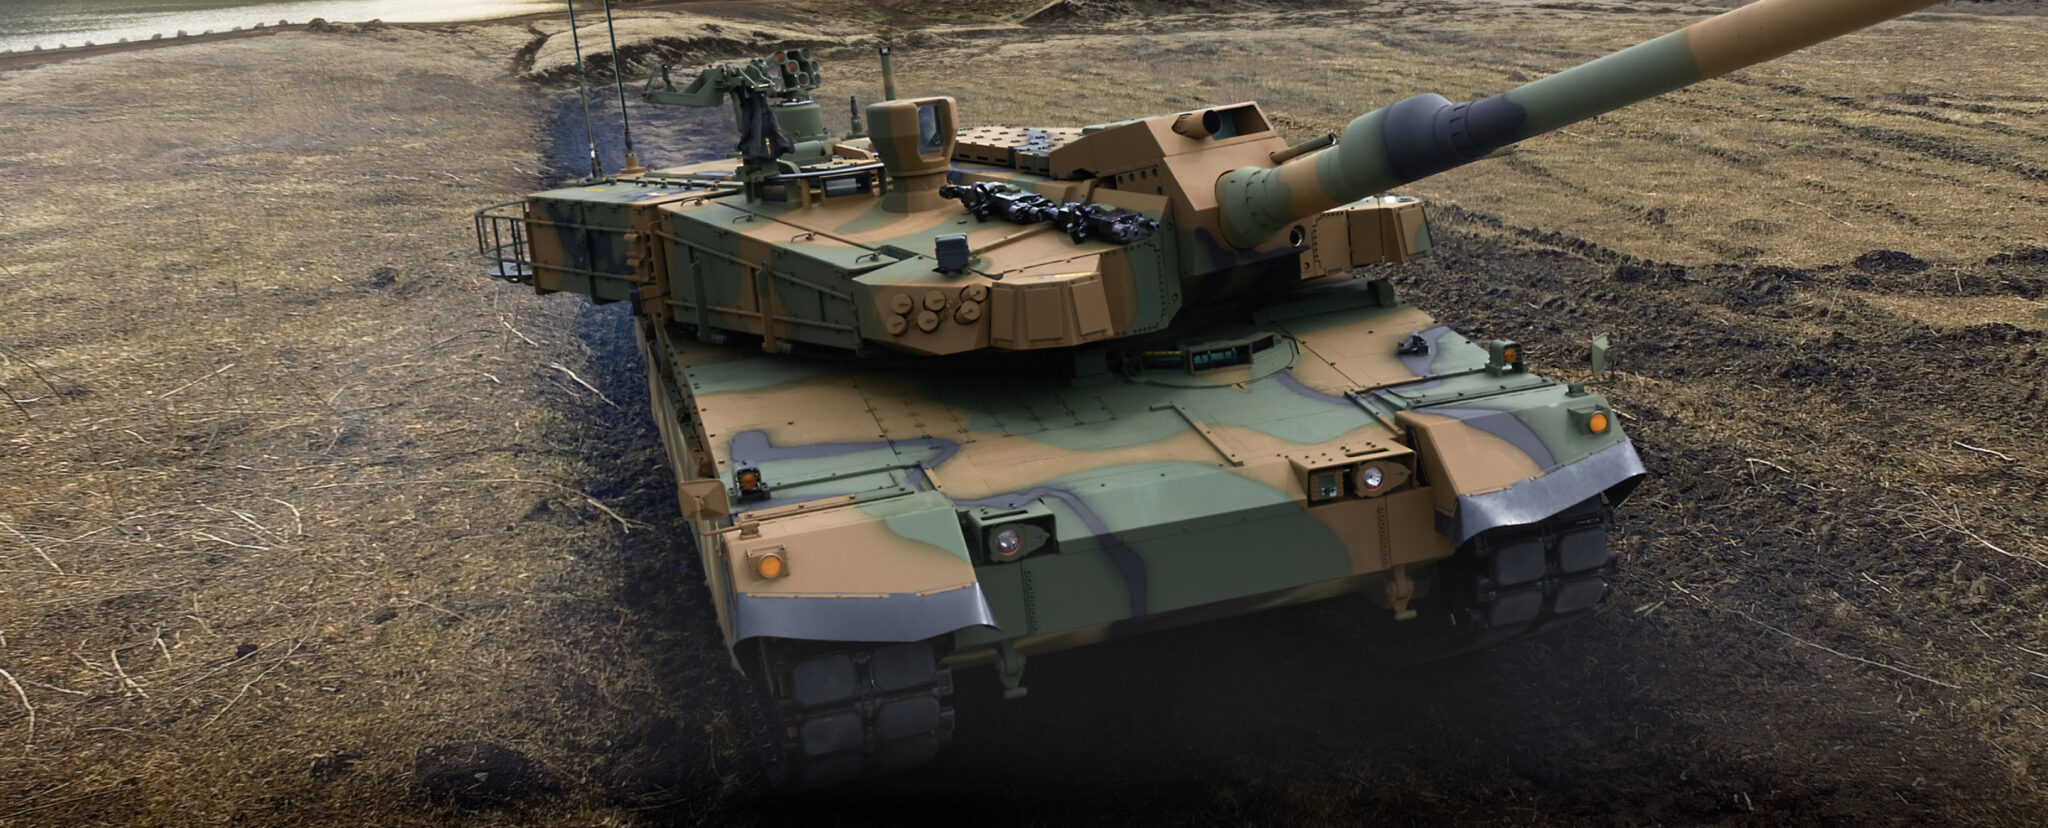 K2 tank, picture by Hyundai Rotem